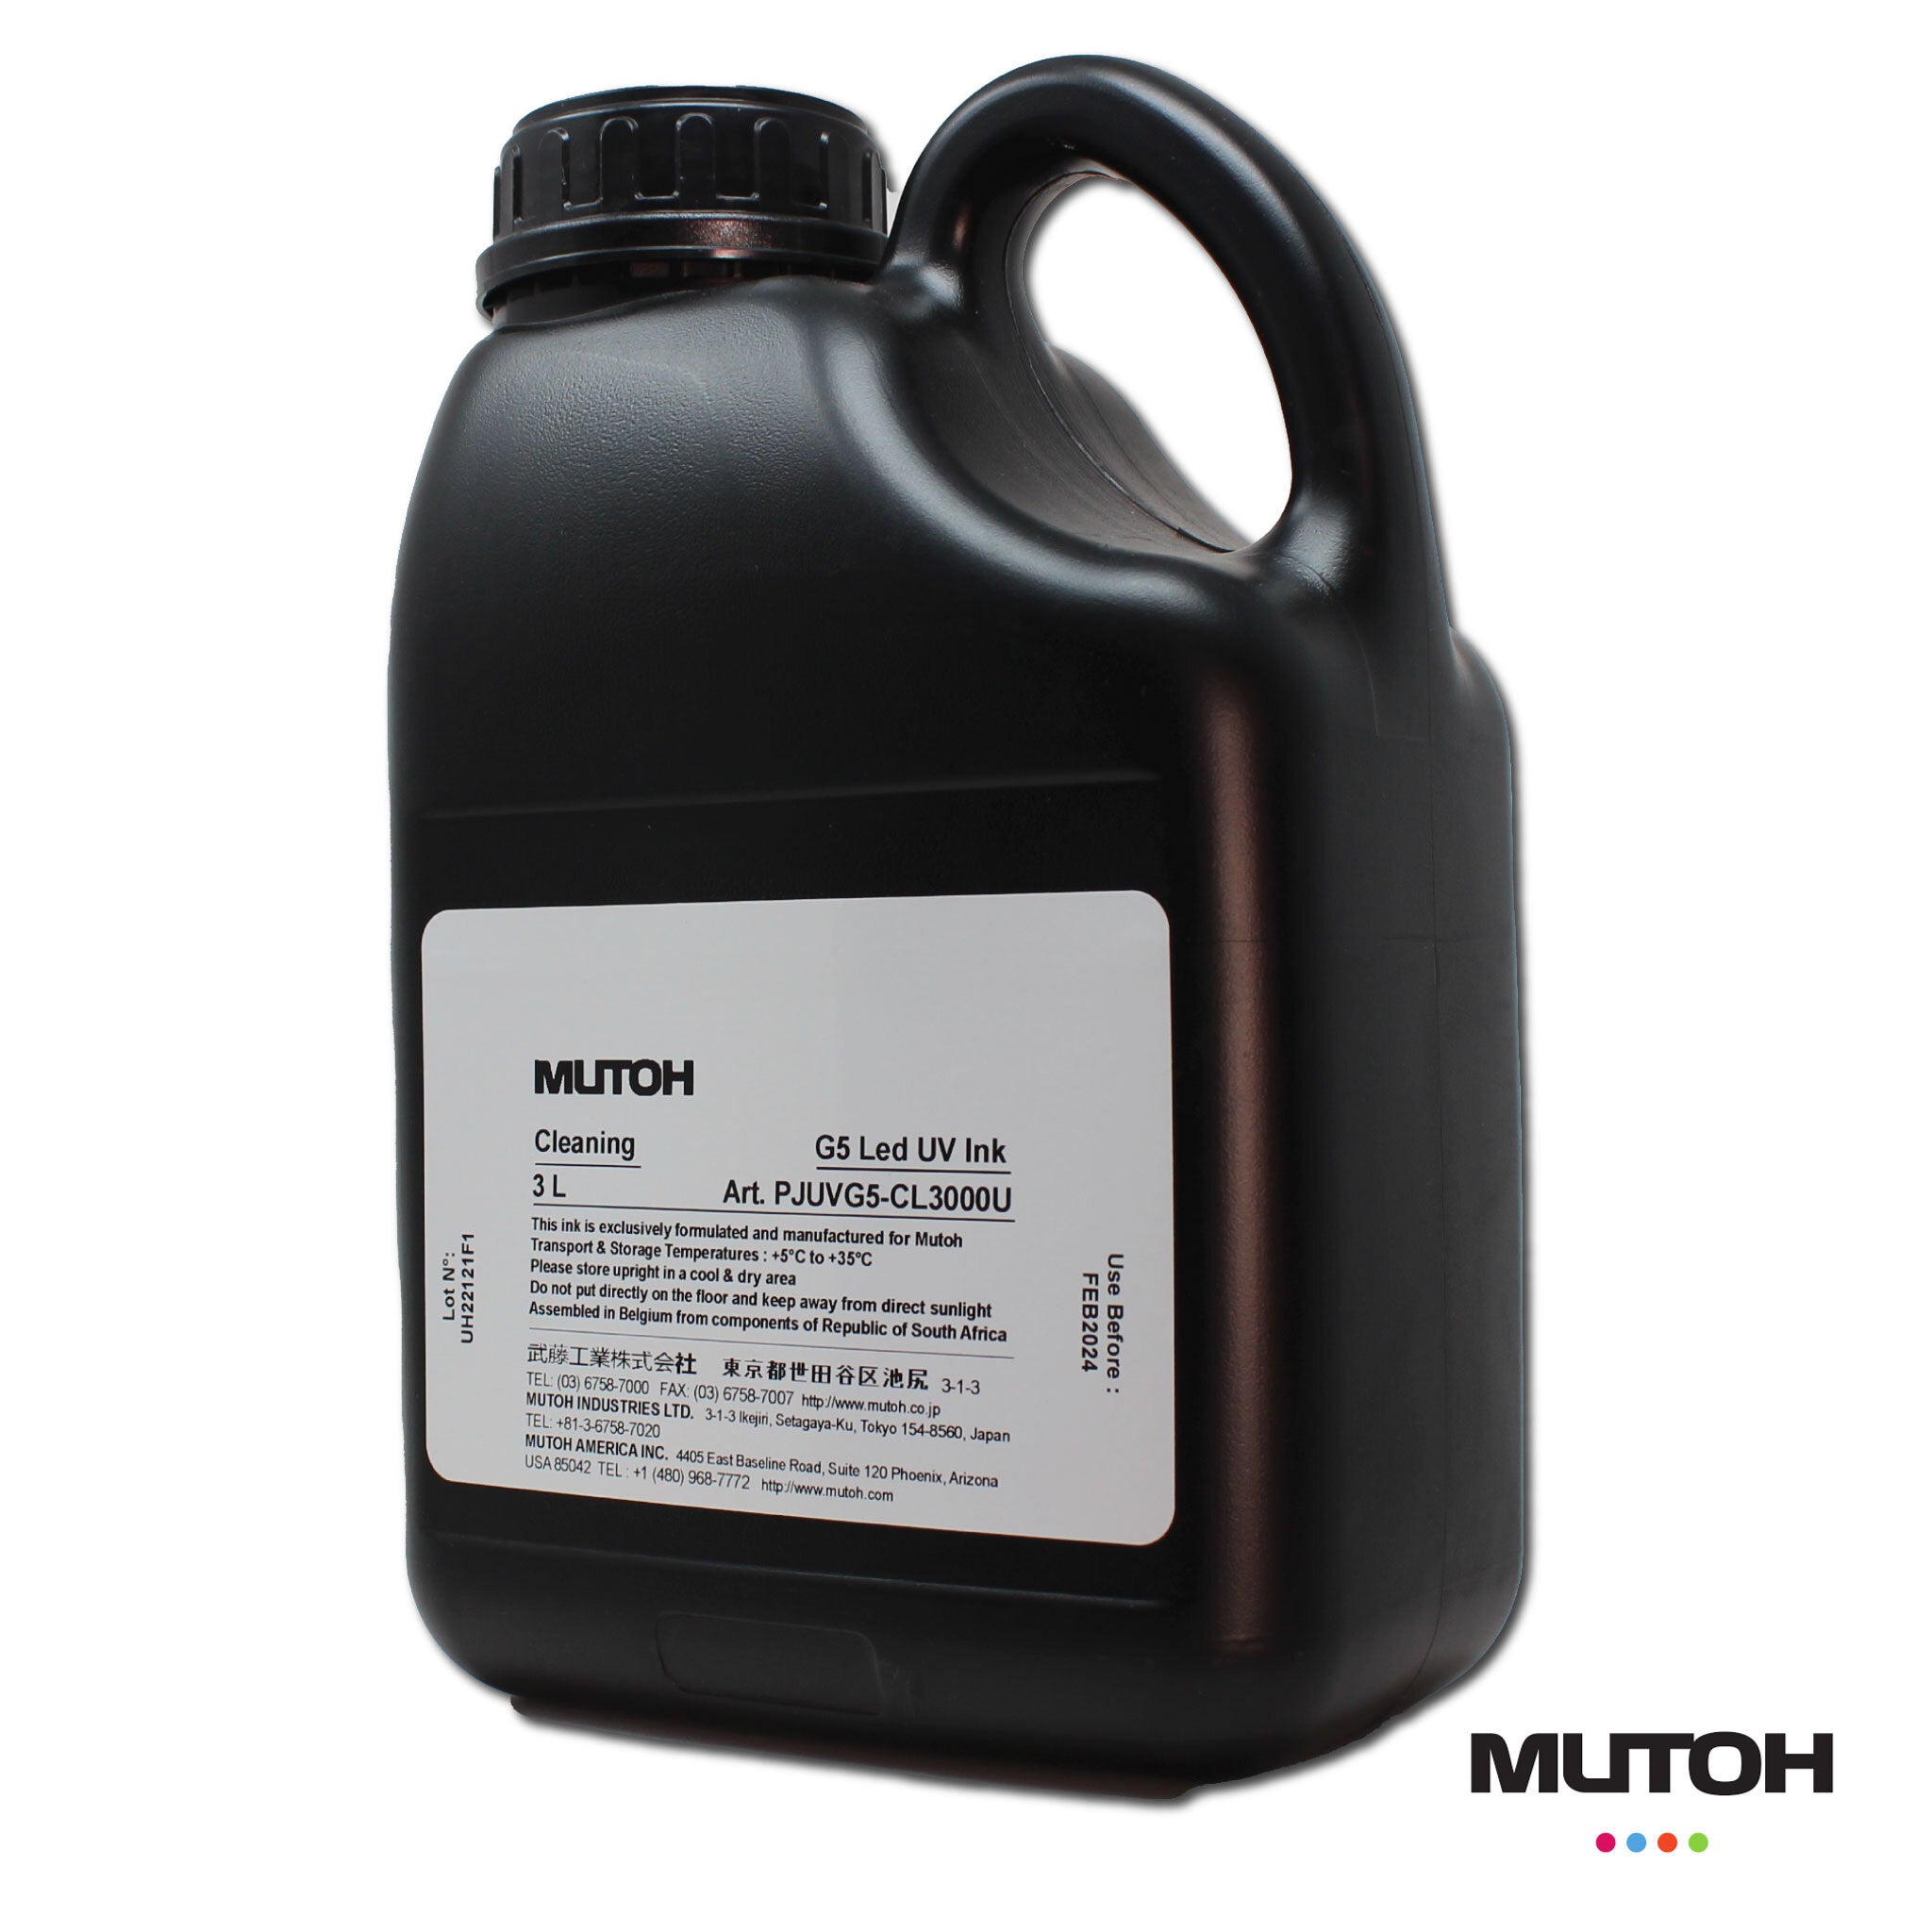 G5 LED UV Ink Cleaning. Mutoh's g5 cleaning solution for uv led printers